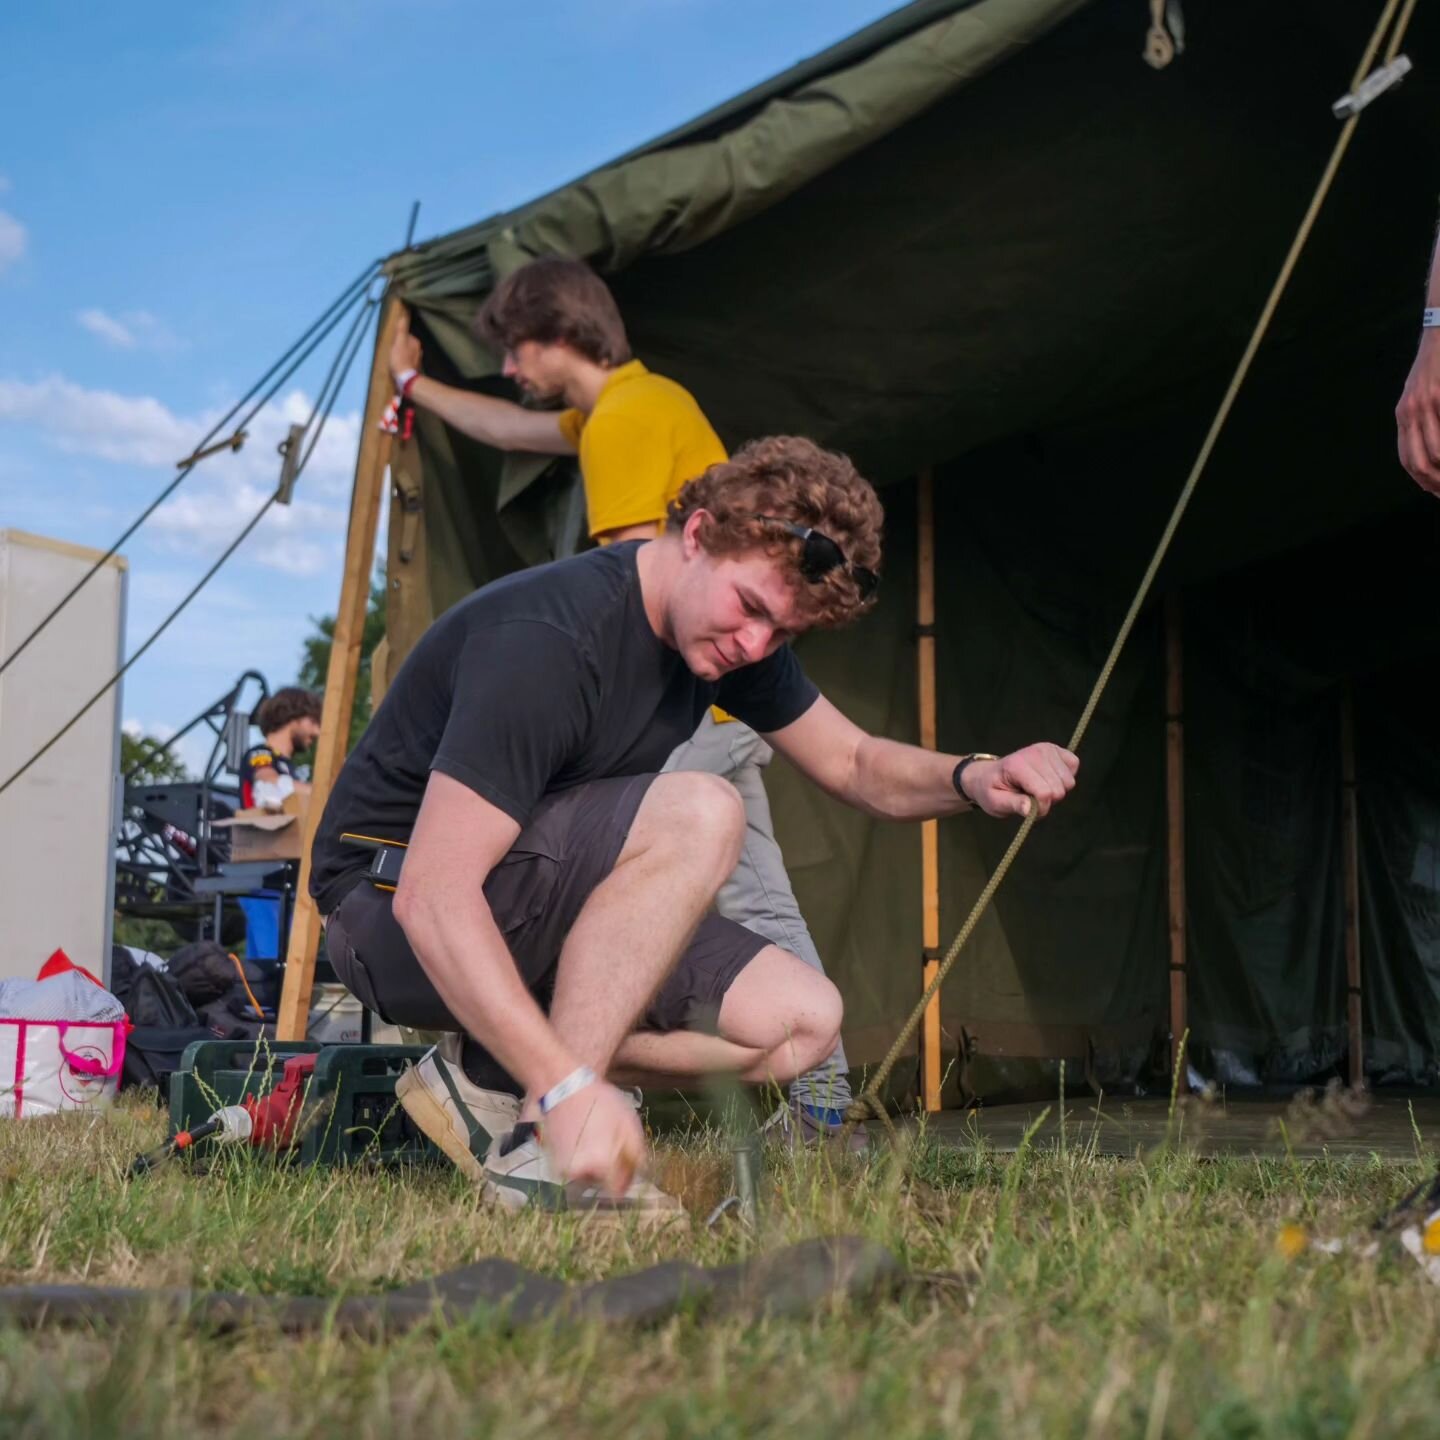 As the second day of @fsnetherlands draws to a close, we reflect on the last few days as a true test of our teamwork. We had to start again after a severe storm damaged the campsite, rebuilding everything from scratch. We moved into our pits today an